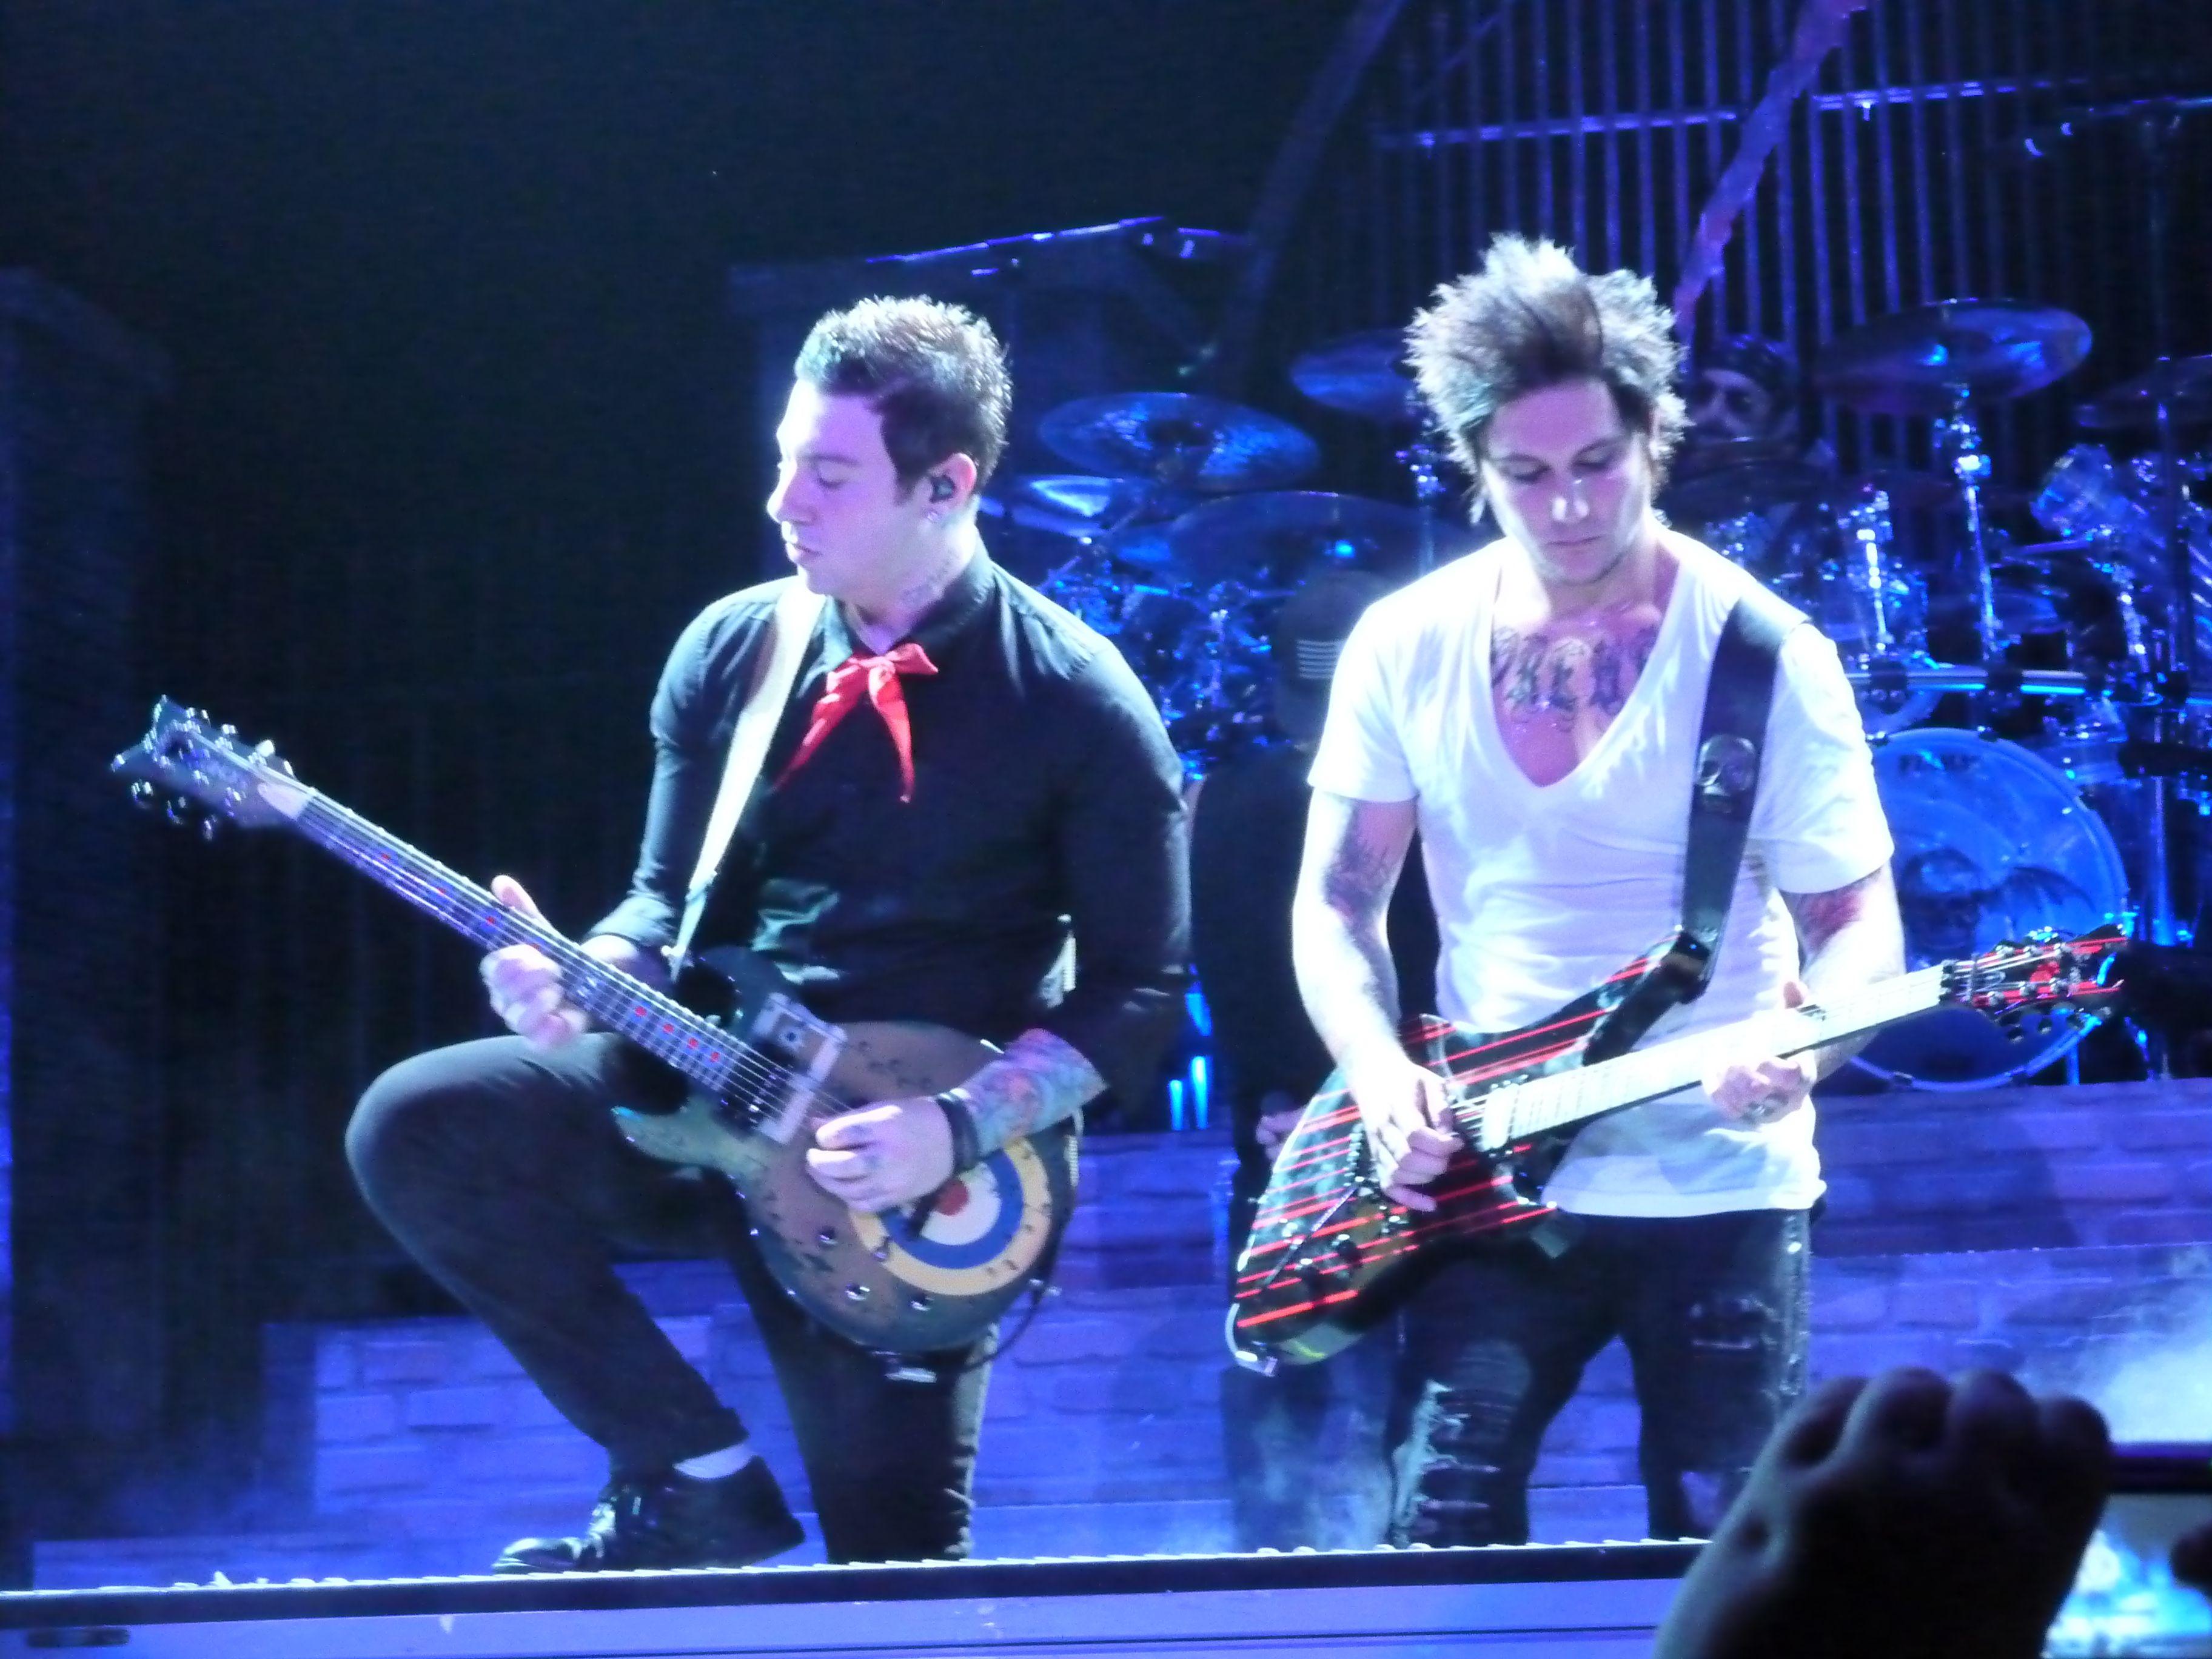 Synyster Gates and Zacky